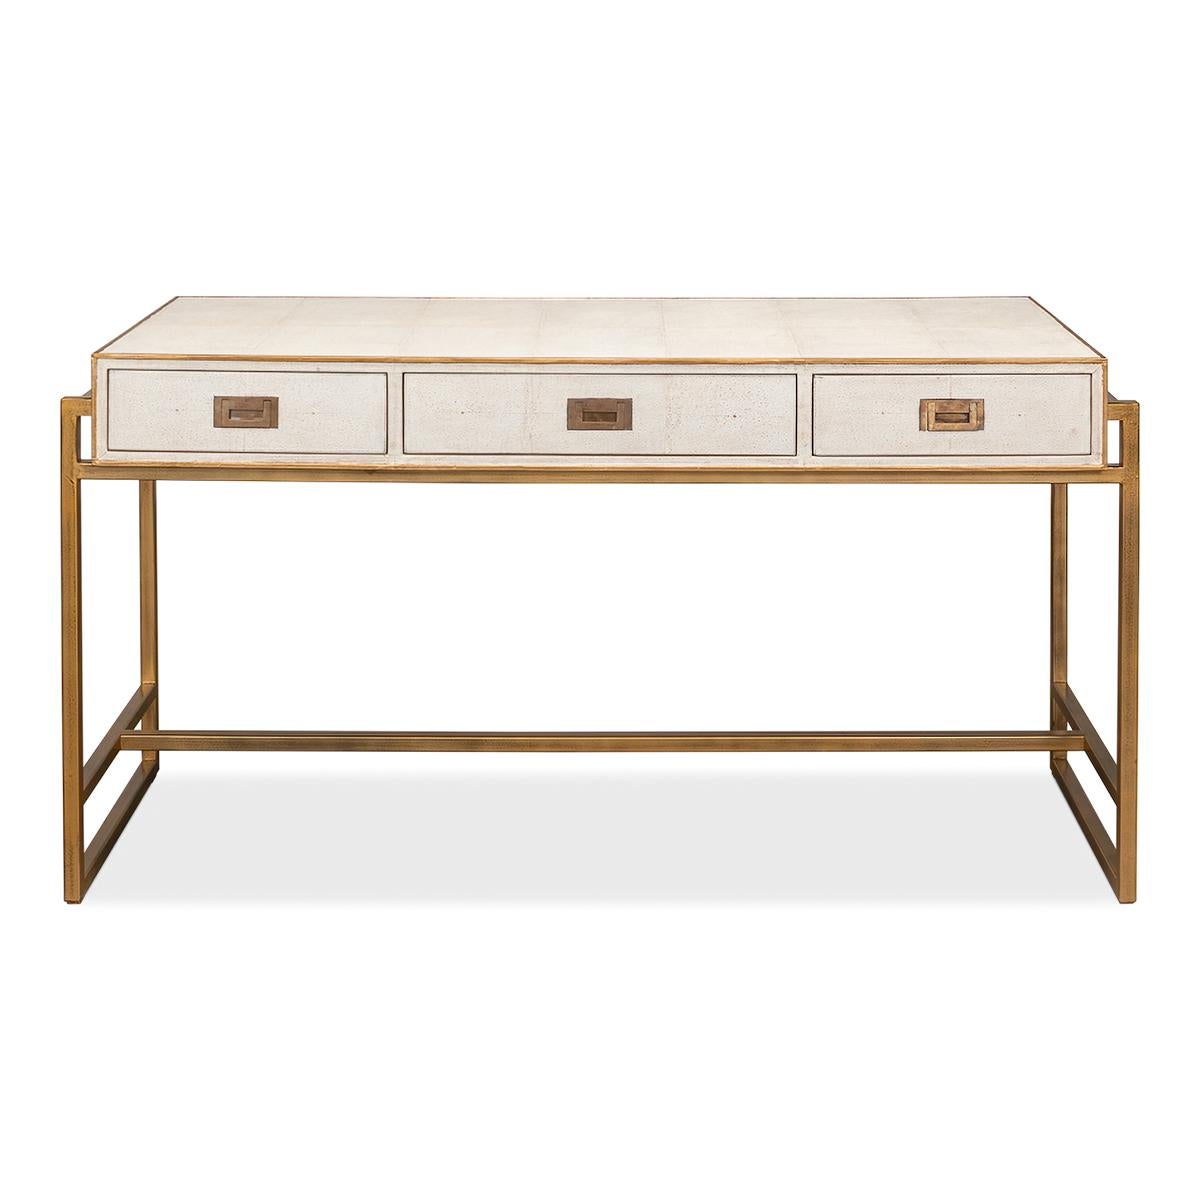 A modern osprey white embossed leather desk with a brass finish iron-framed base. Three drawers with marbleized paper-lined interiors and with brass pull handles.

Dimensions: 60